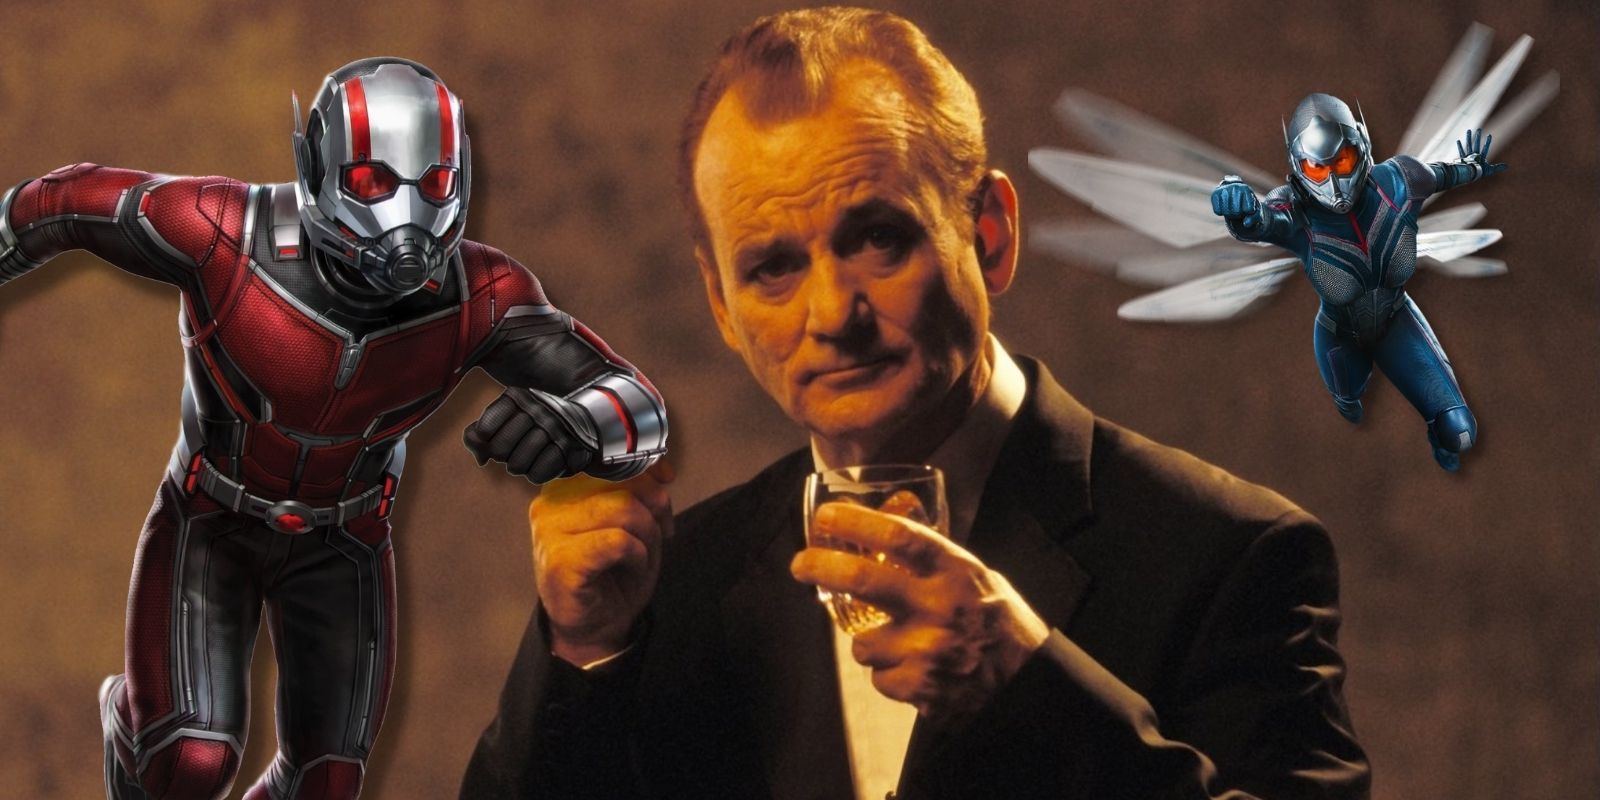 Bill Murray, as seen in Lost in Translation, alongside Anti-Man and The Wasp